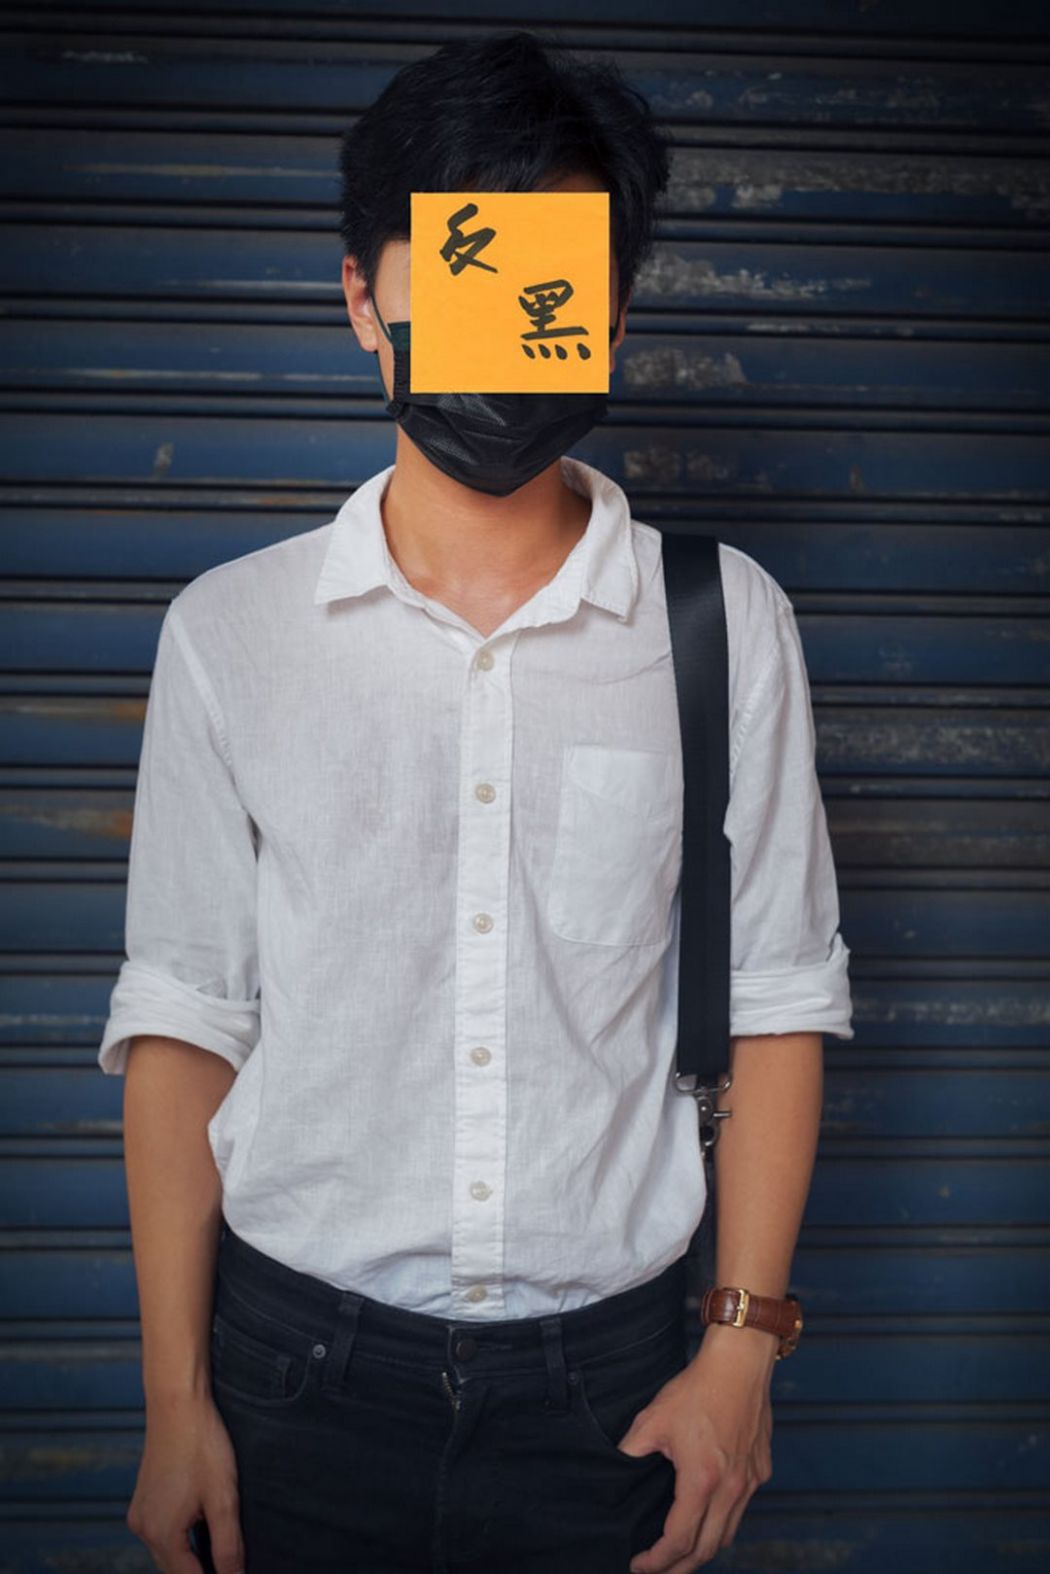 Hong Kong protesters movement without face sticker notes